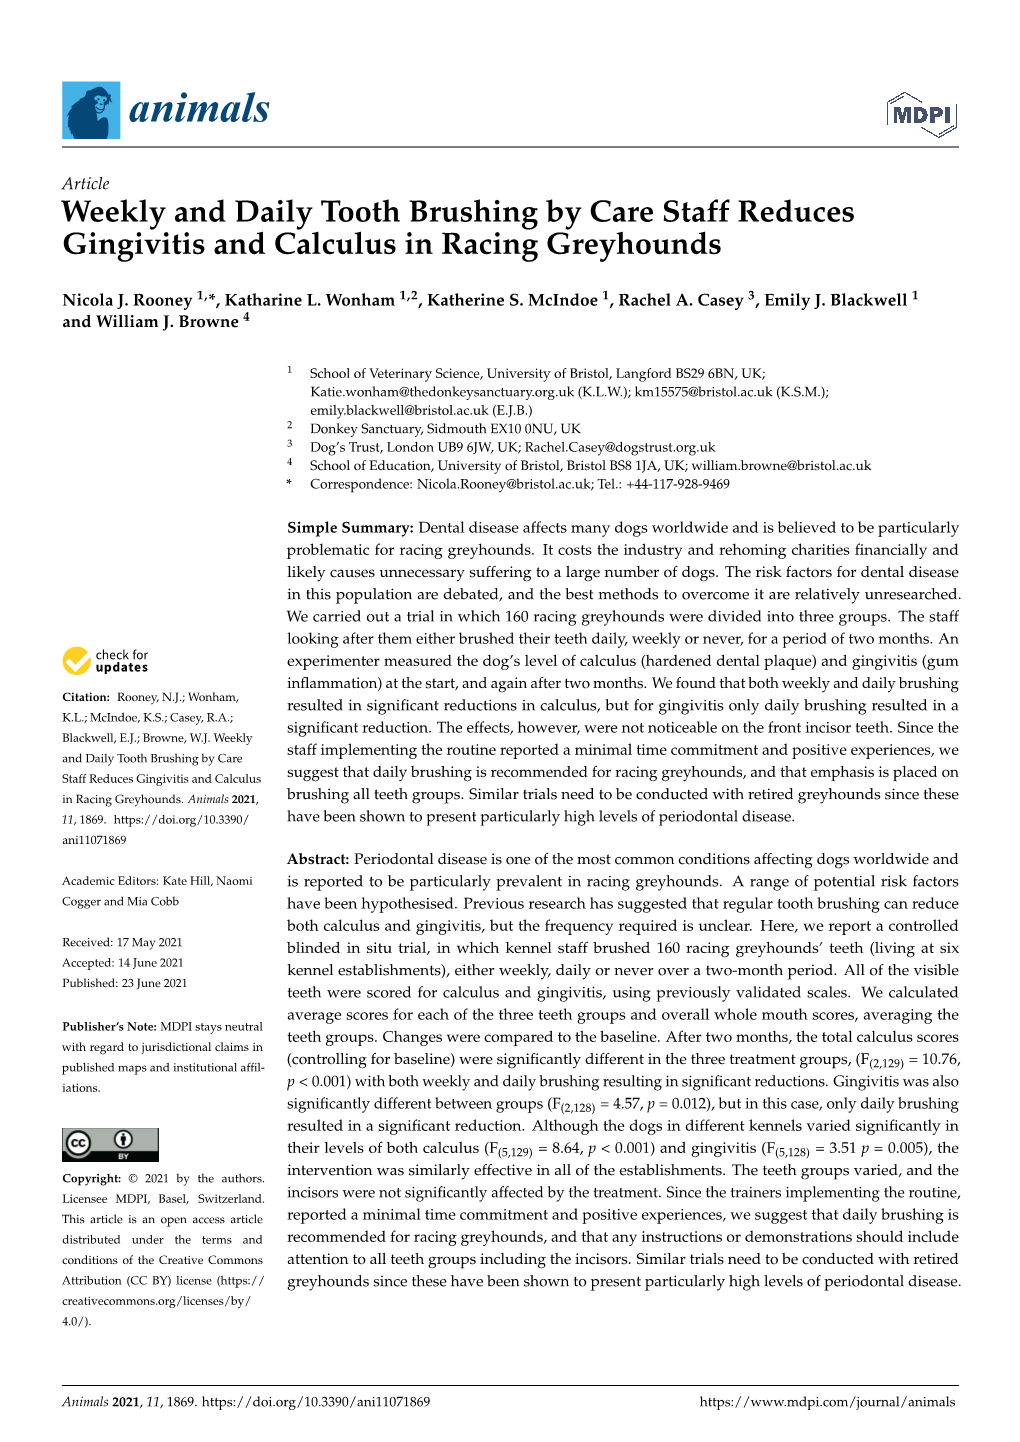 Weekly and Daily Tooth Brushing by Care Staff Reduces Gingivitis and Calculus in Racing Greyhounds